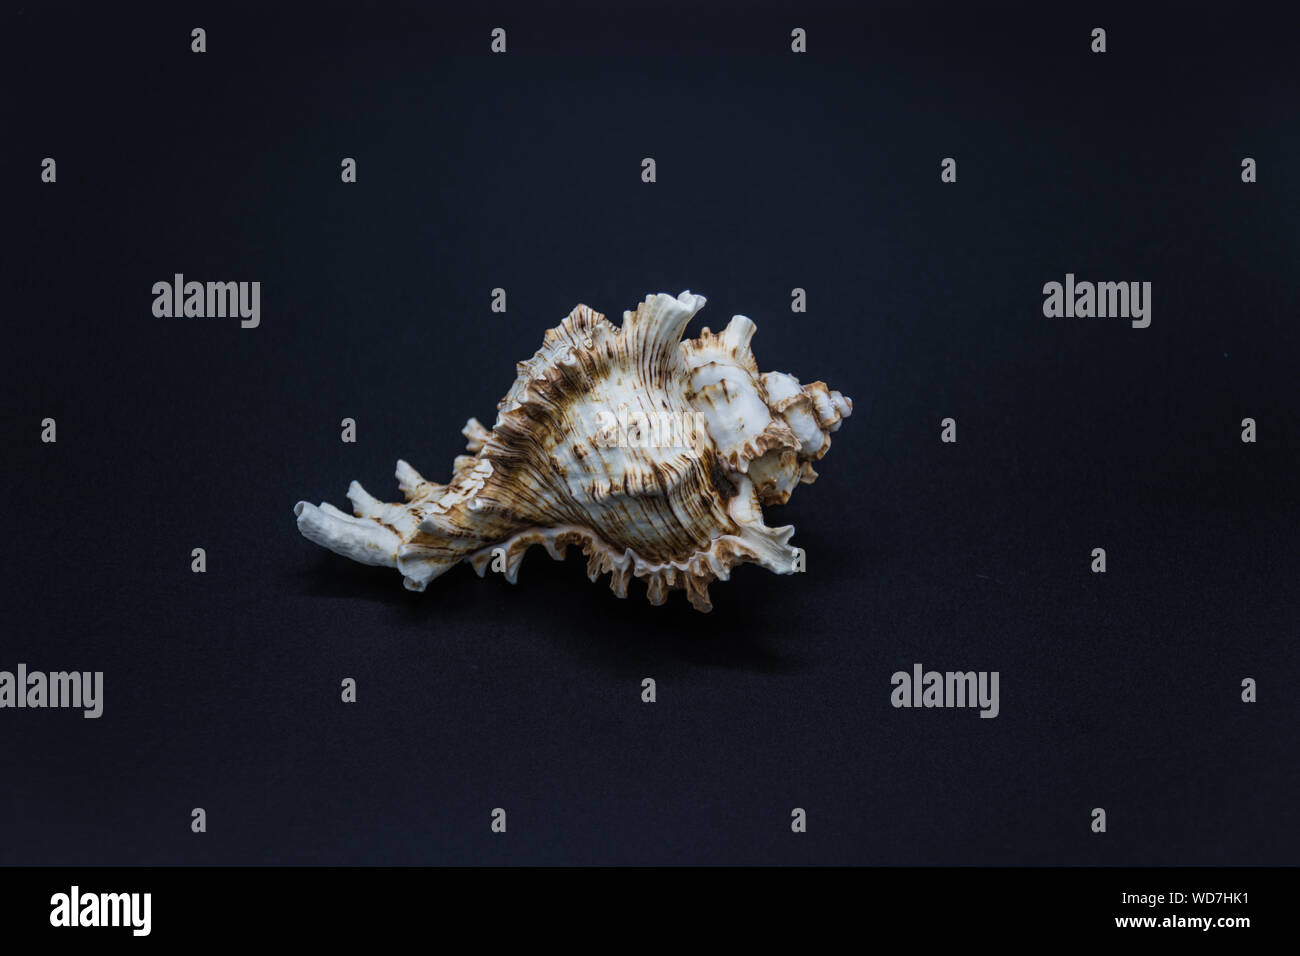 Shell of the predatory sea snails of family Muricidae, also known as murex snails or rock snails on the black background Stock Photo